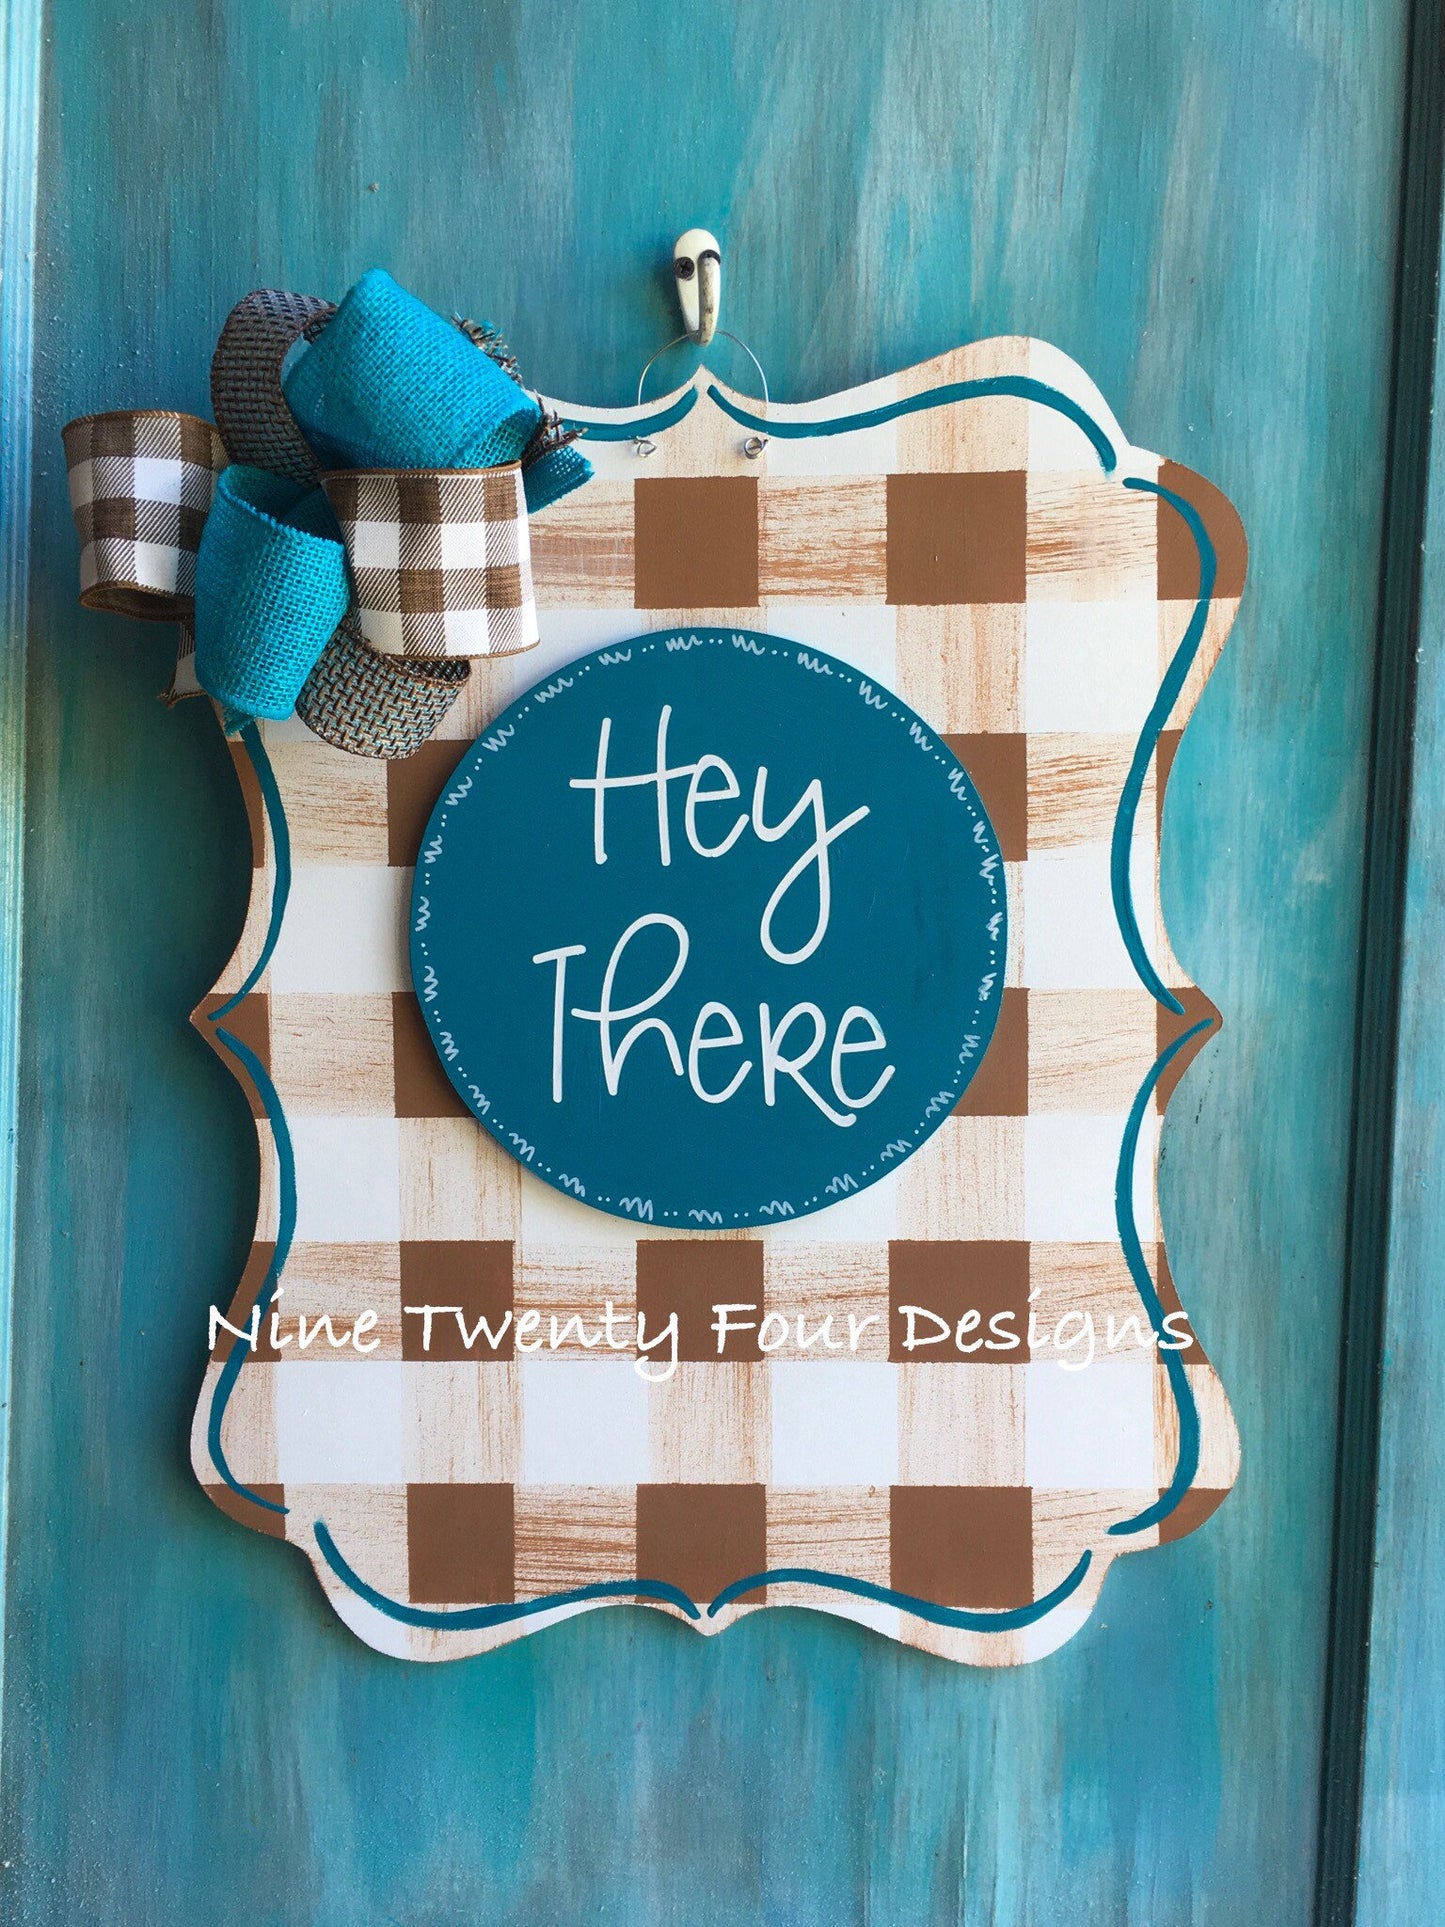 Hey There Plaid Decor, EVERYDAY Decor, Outdoor Decor, Door Decor, FRONT DOOR Decor, Door Hanger